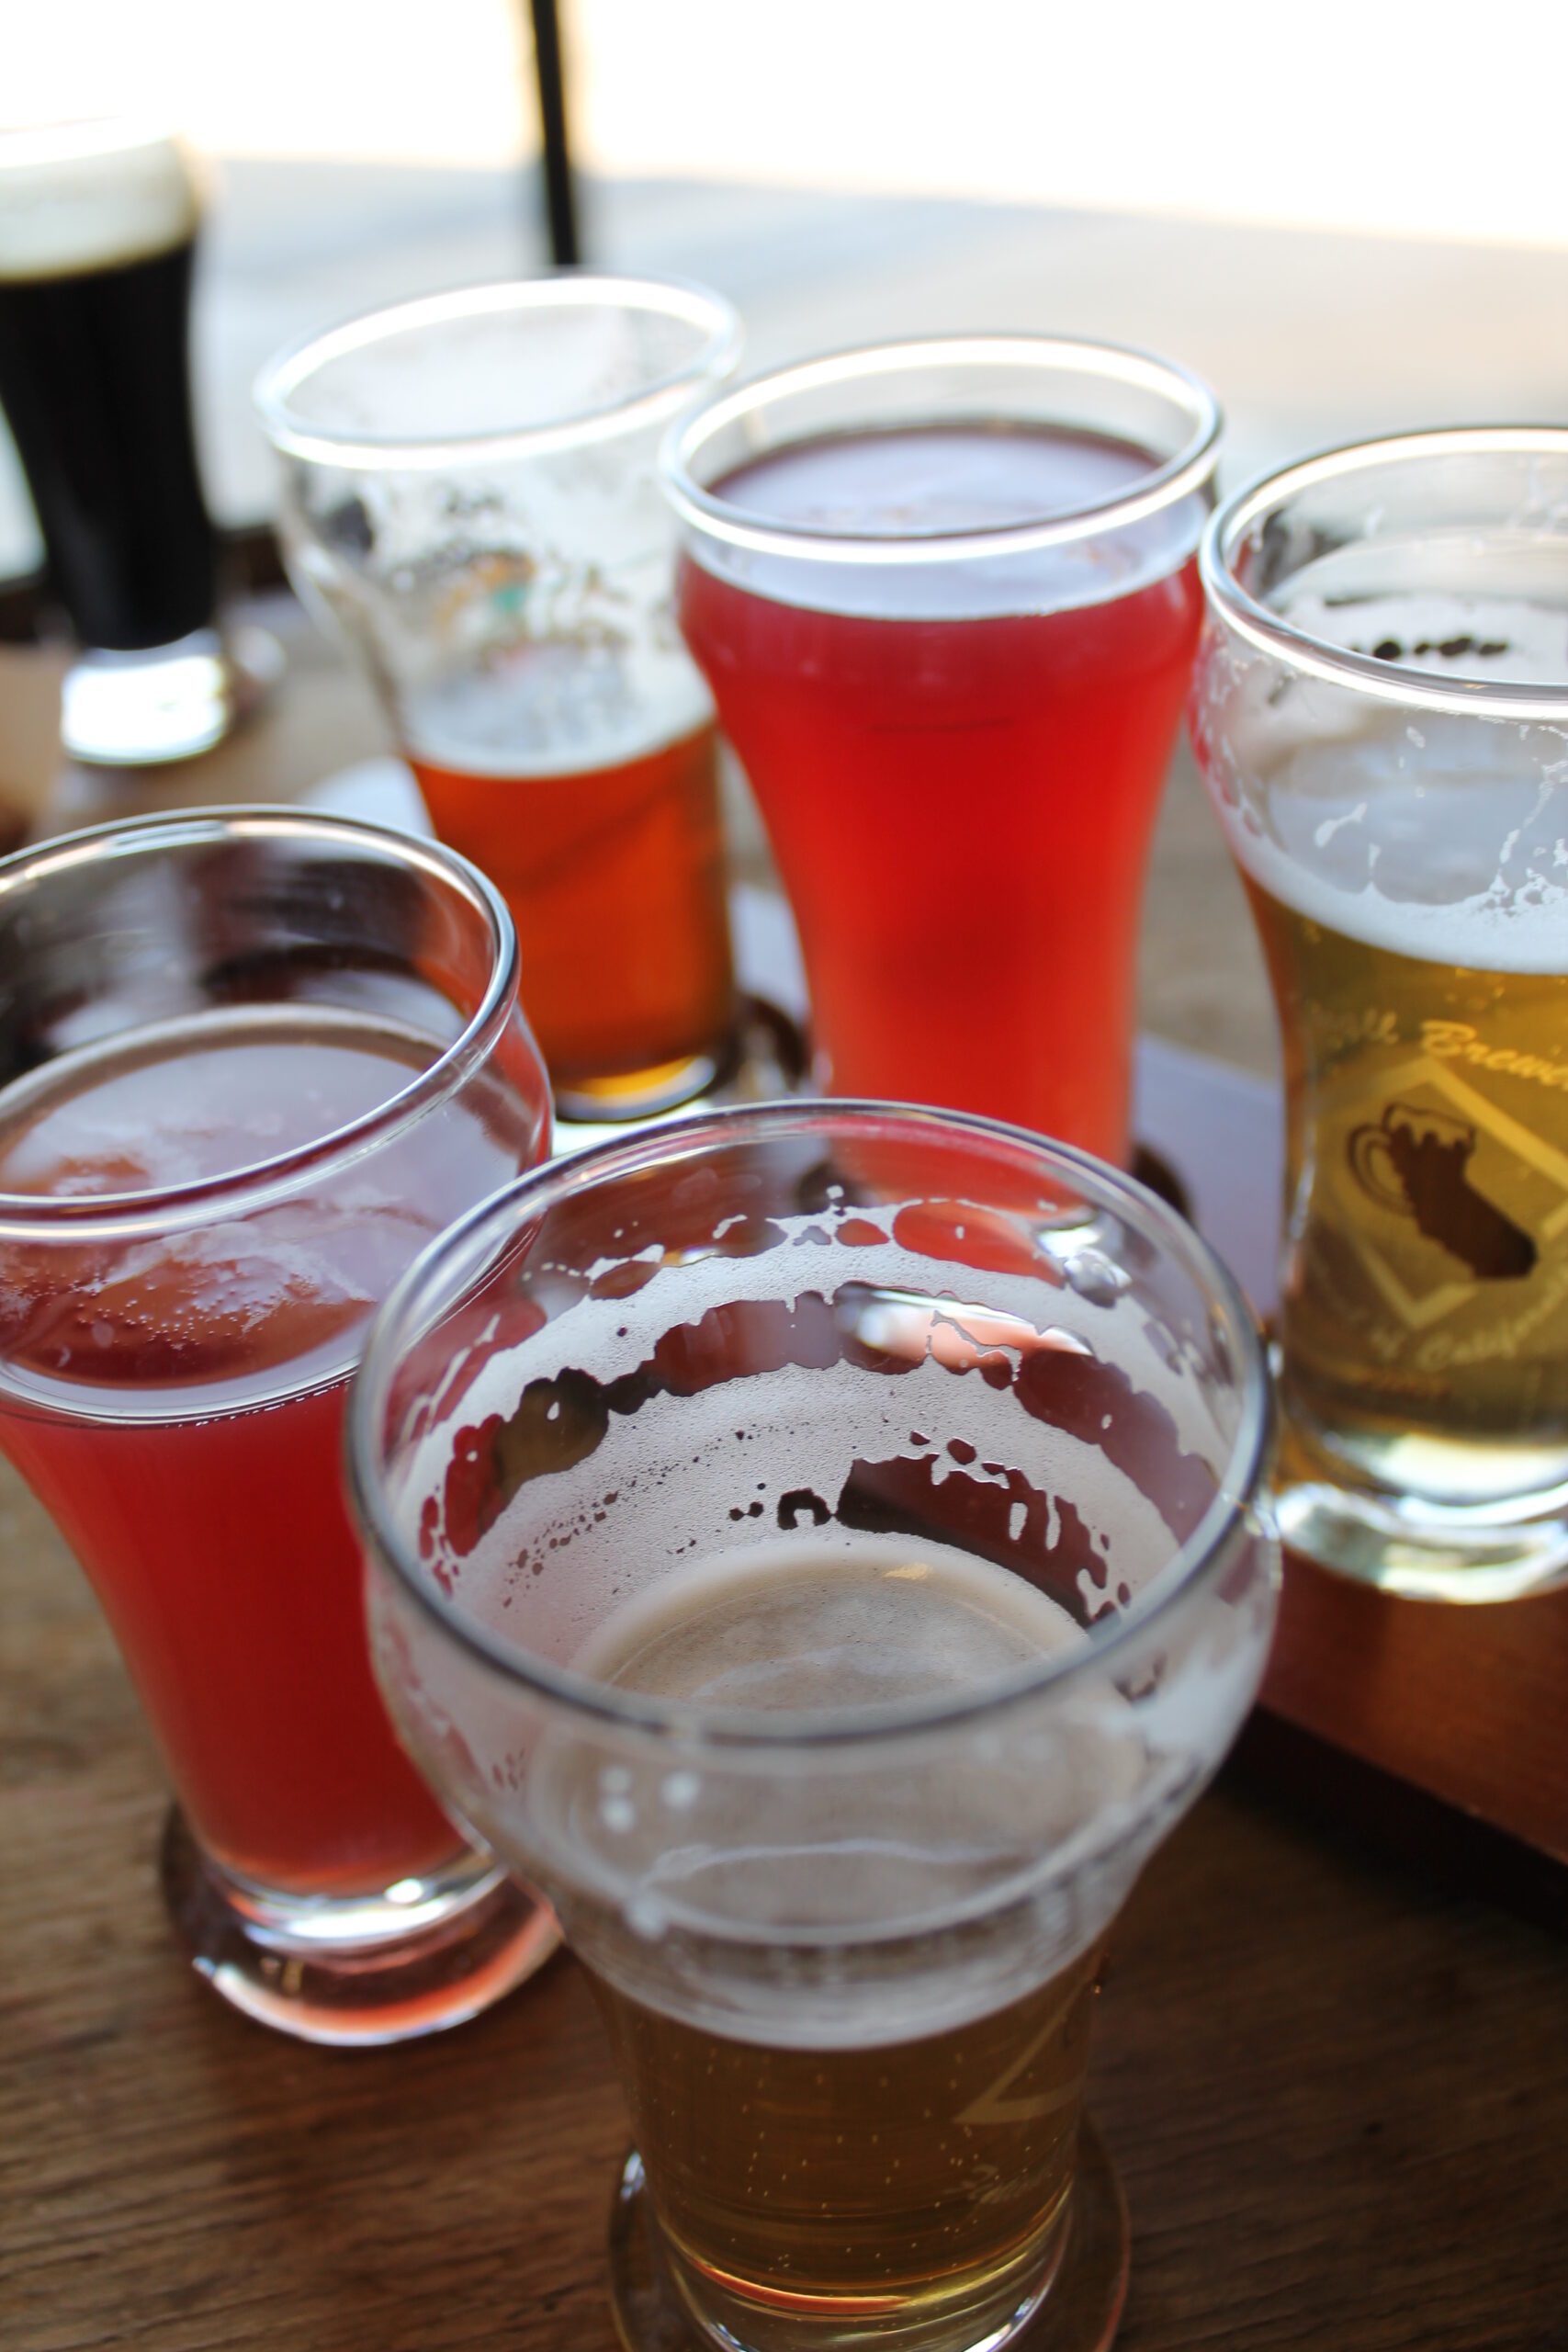 Sample a variety of craft beers along the Bay Area Ale Trail at Hermitage Brewing Company in San Jose, Calif. (Photo: Super G)